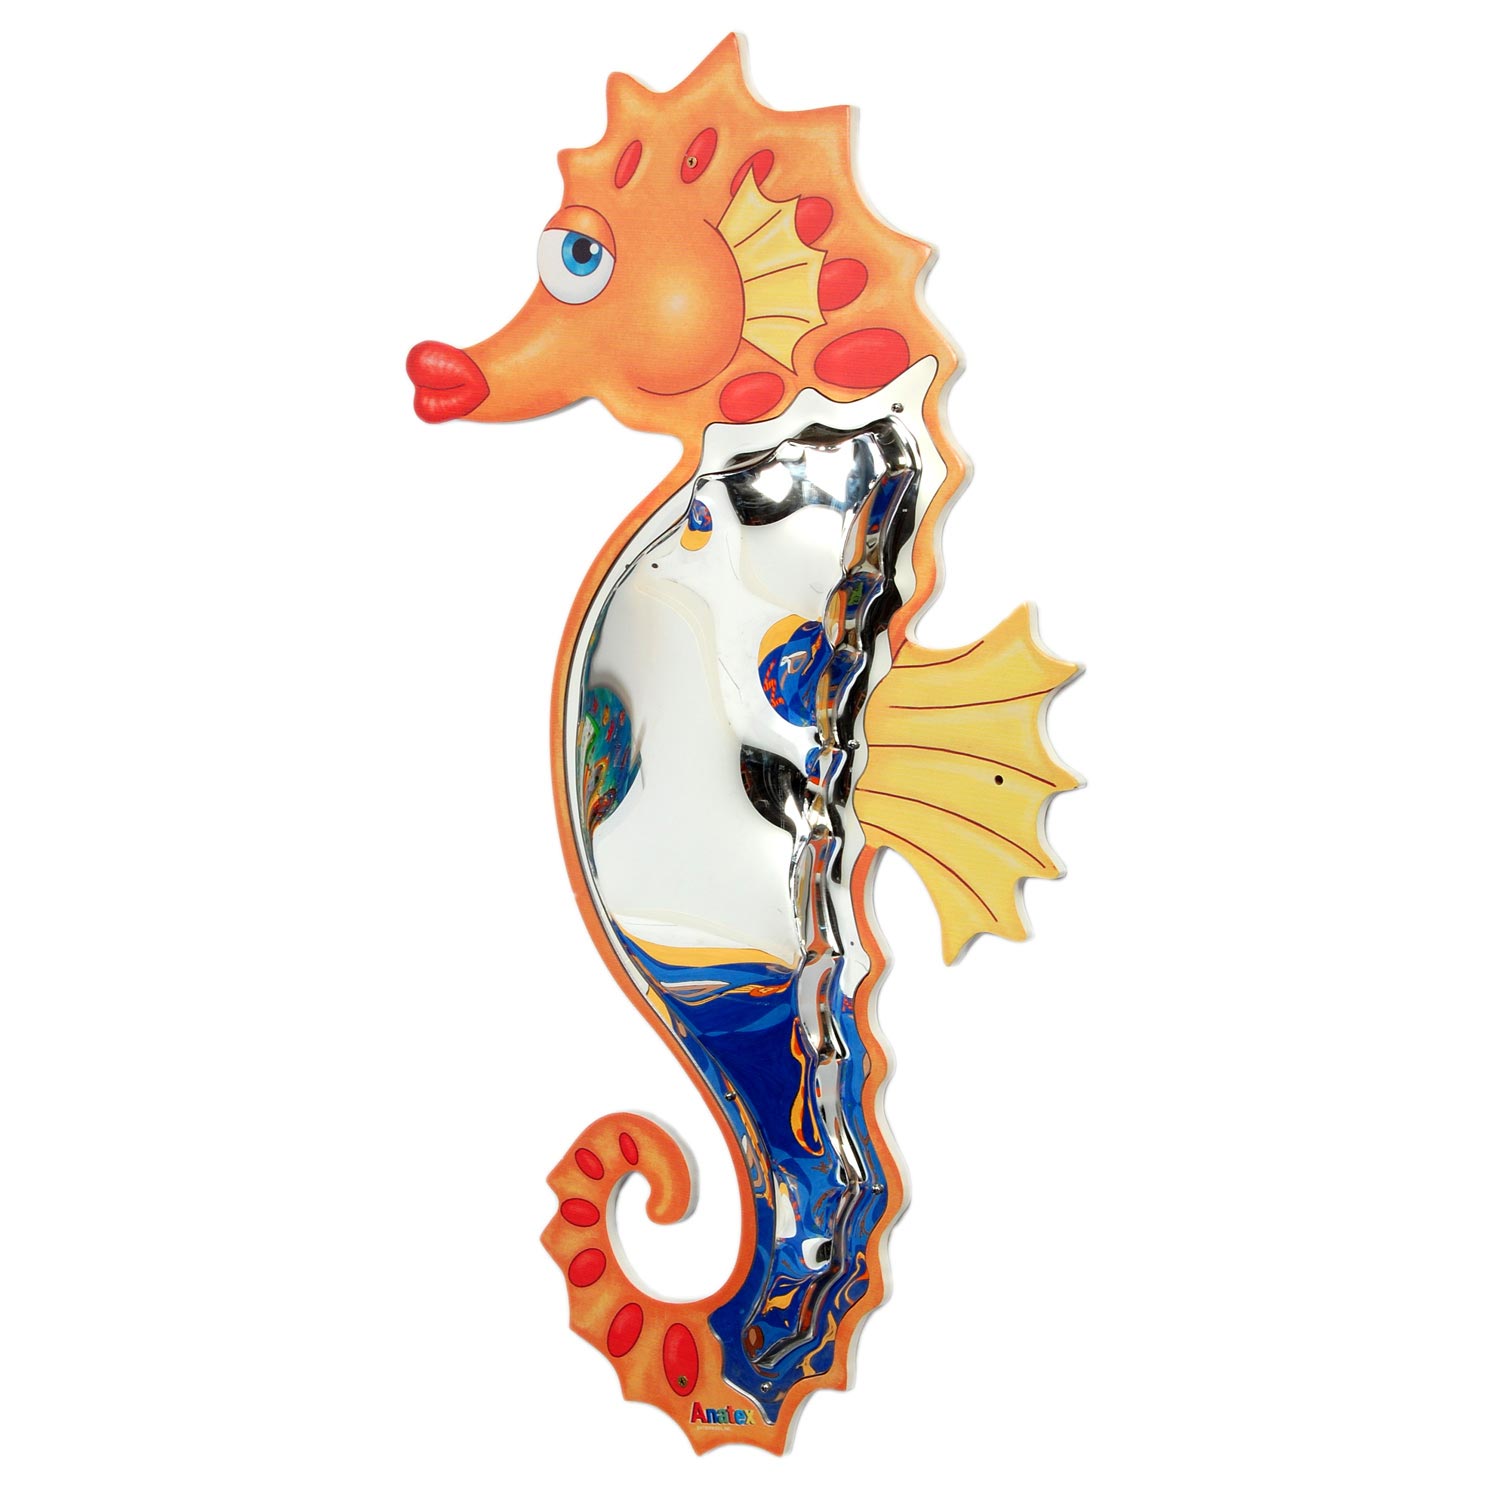 Seahorse toy for kids